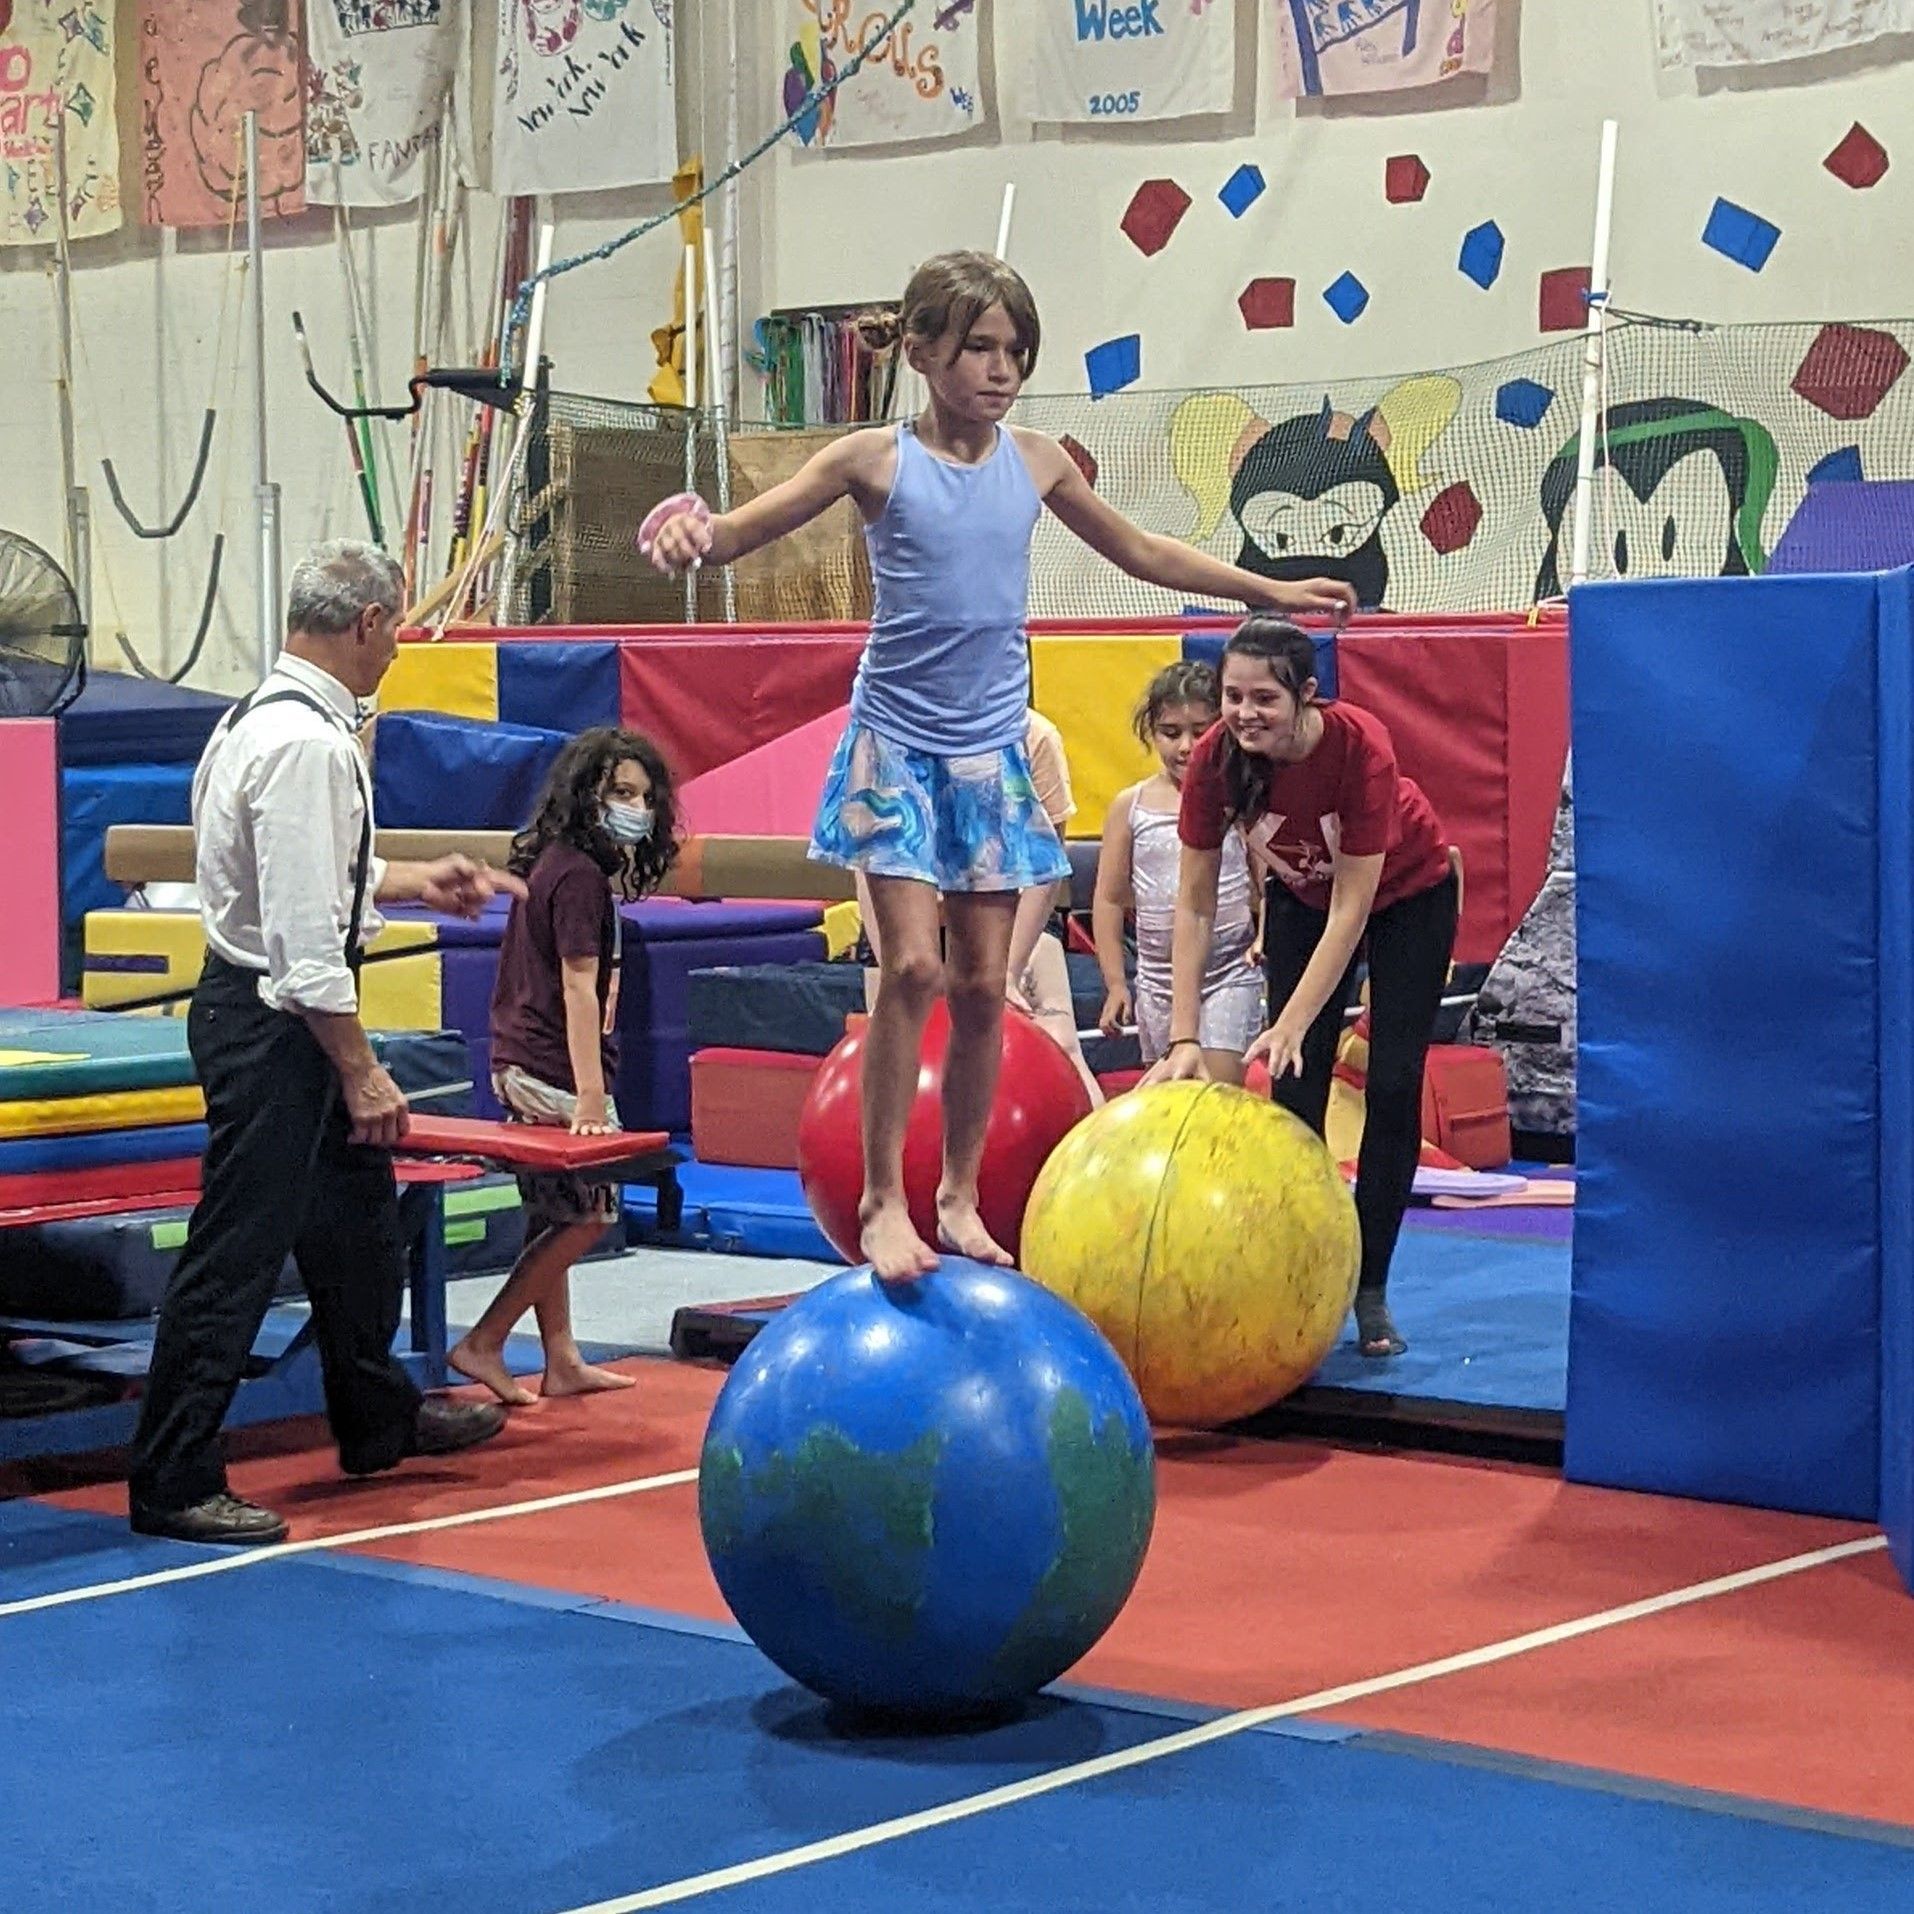 A girl is balancing on a ball in a gym